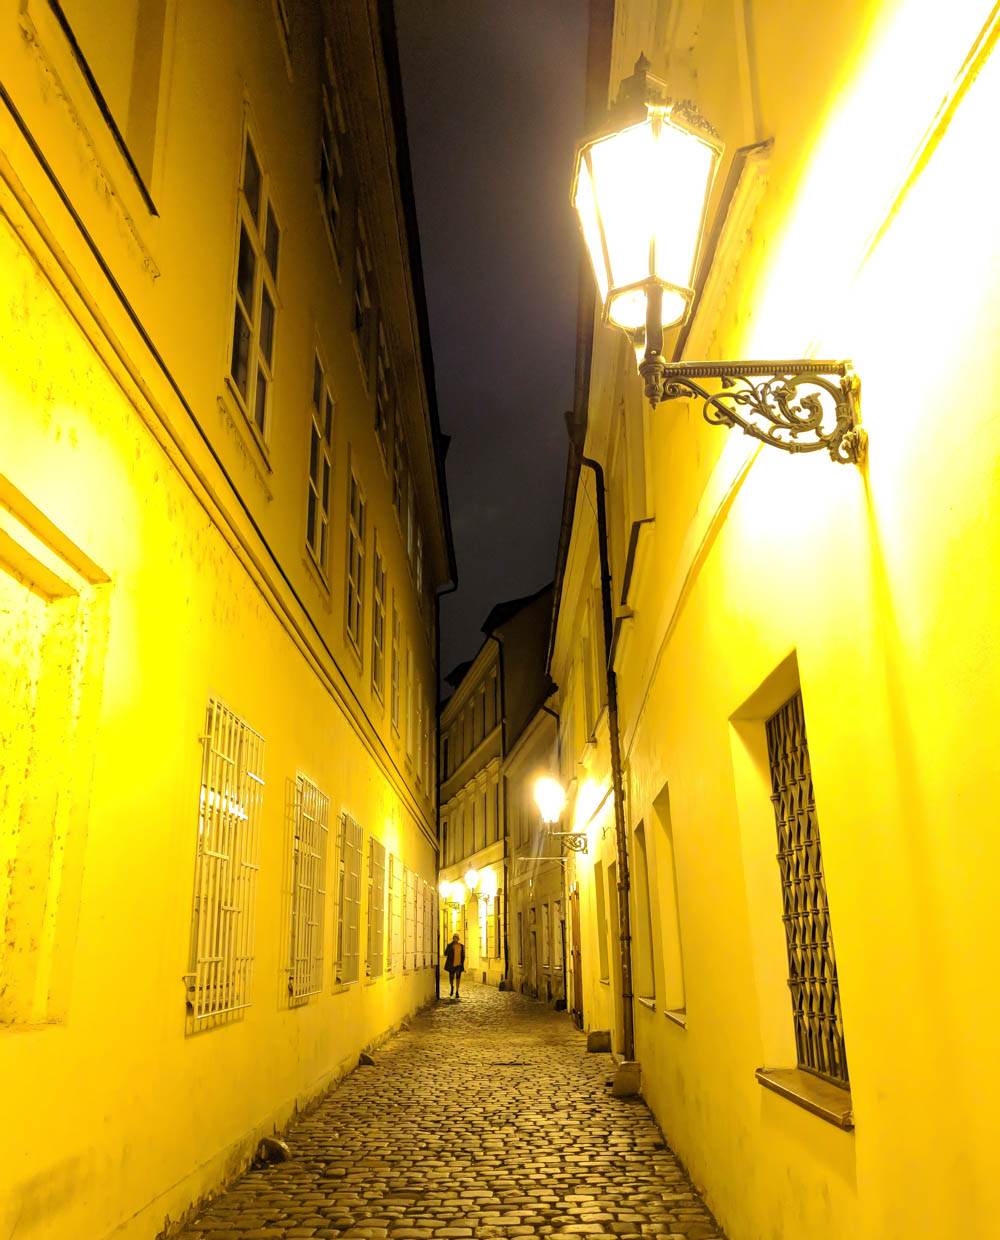 deserted Prague alleyway | How to NOT guide for getting robbed abroad | What to do before, during, and after getting robbed abroad. Pickpocketing in Europe, travel insurance, etc. #traveltips #europe